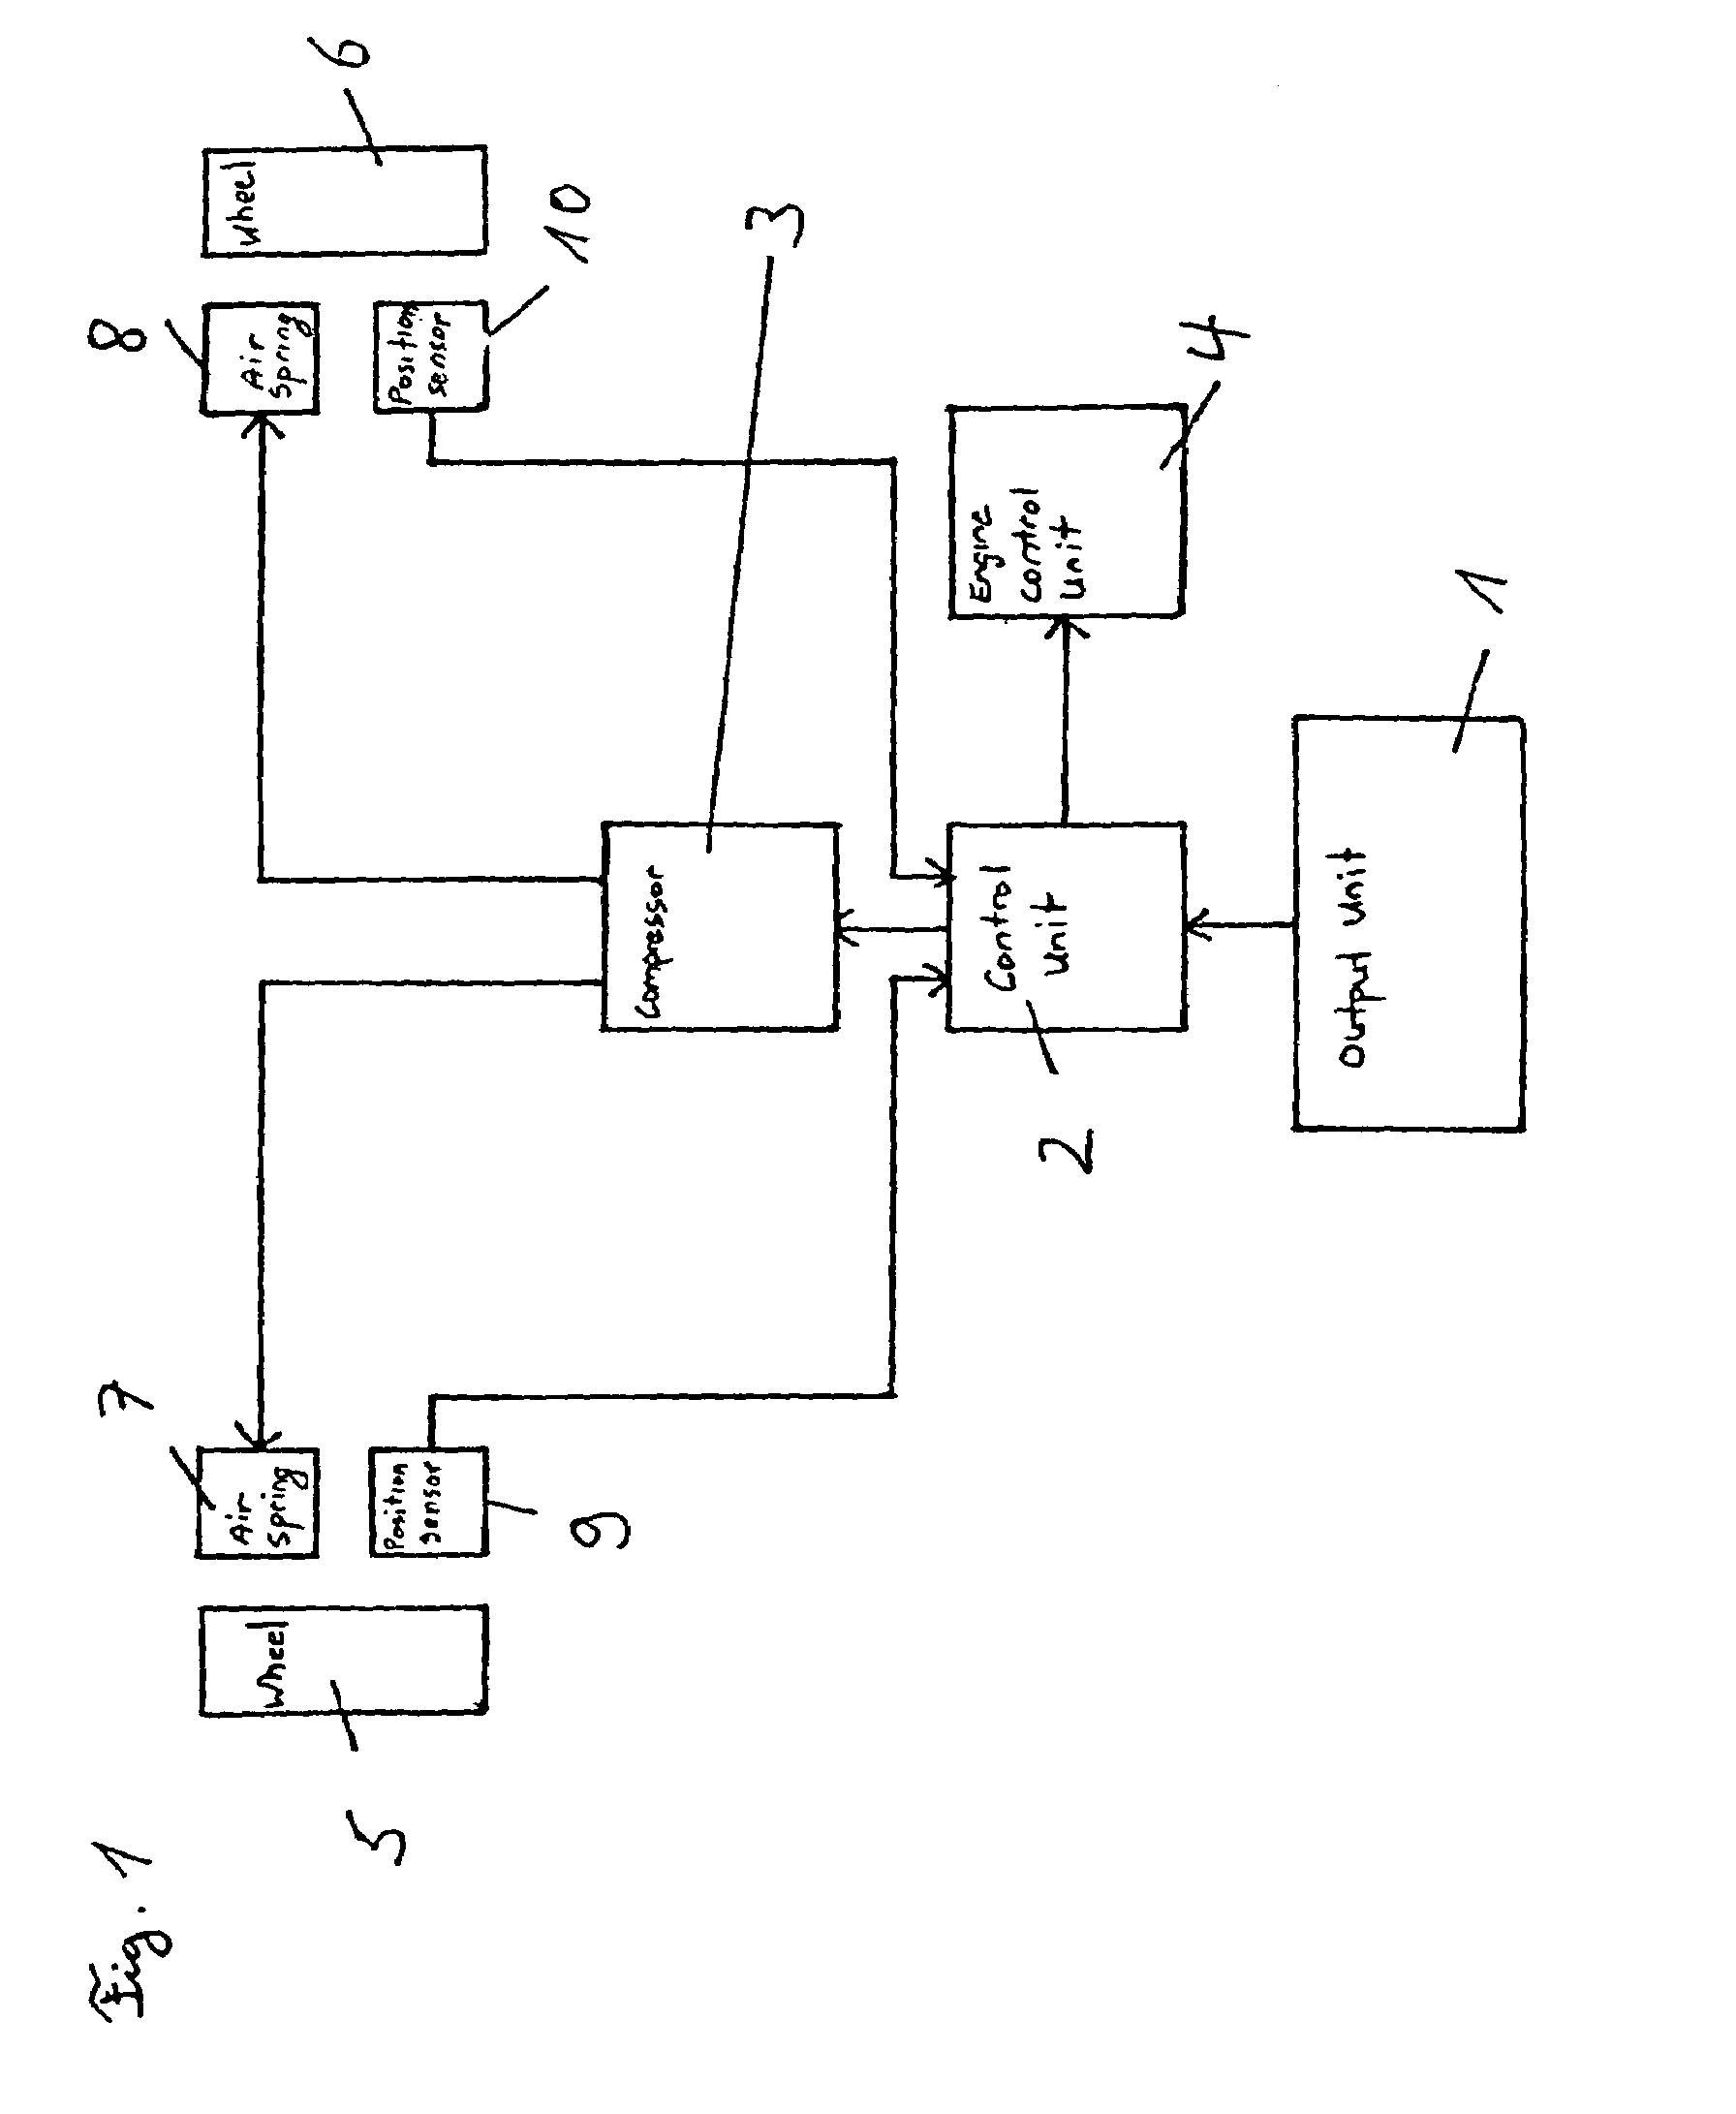 Method and device for ride height control of a motor vehicle